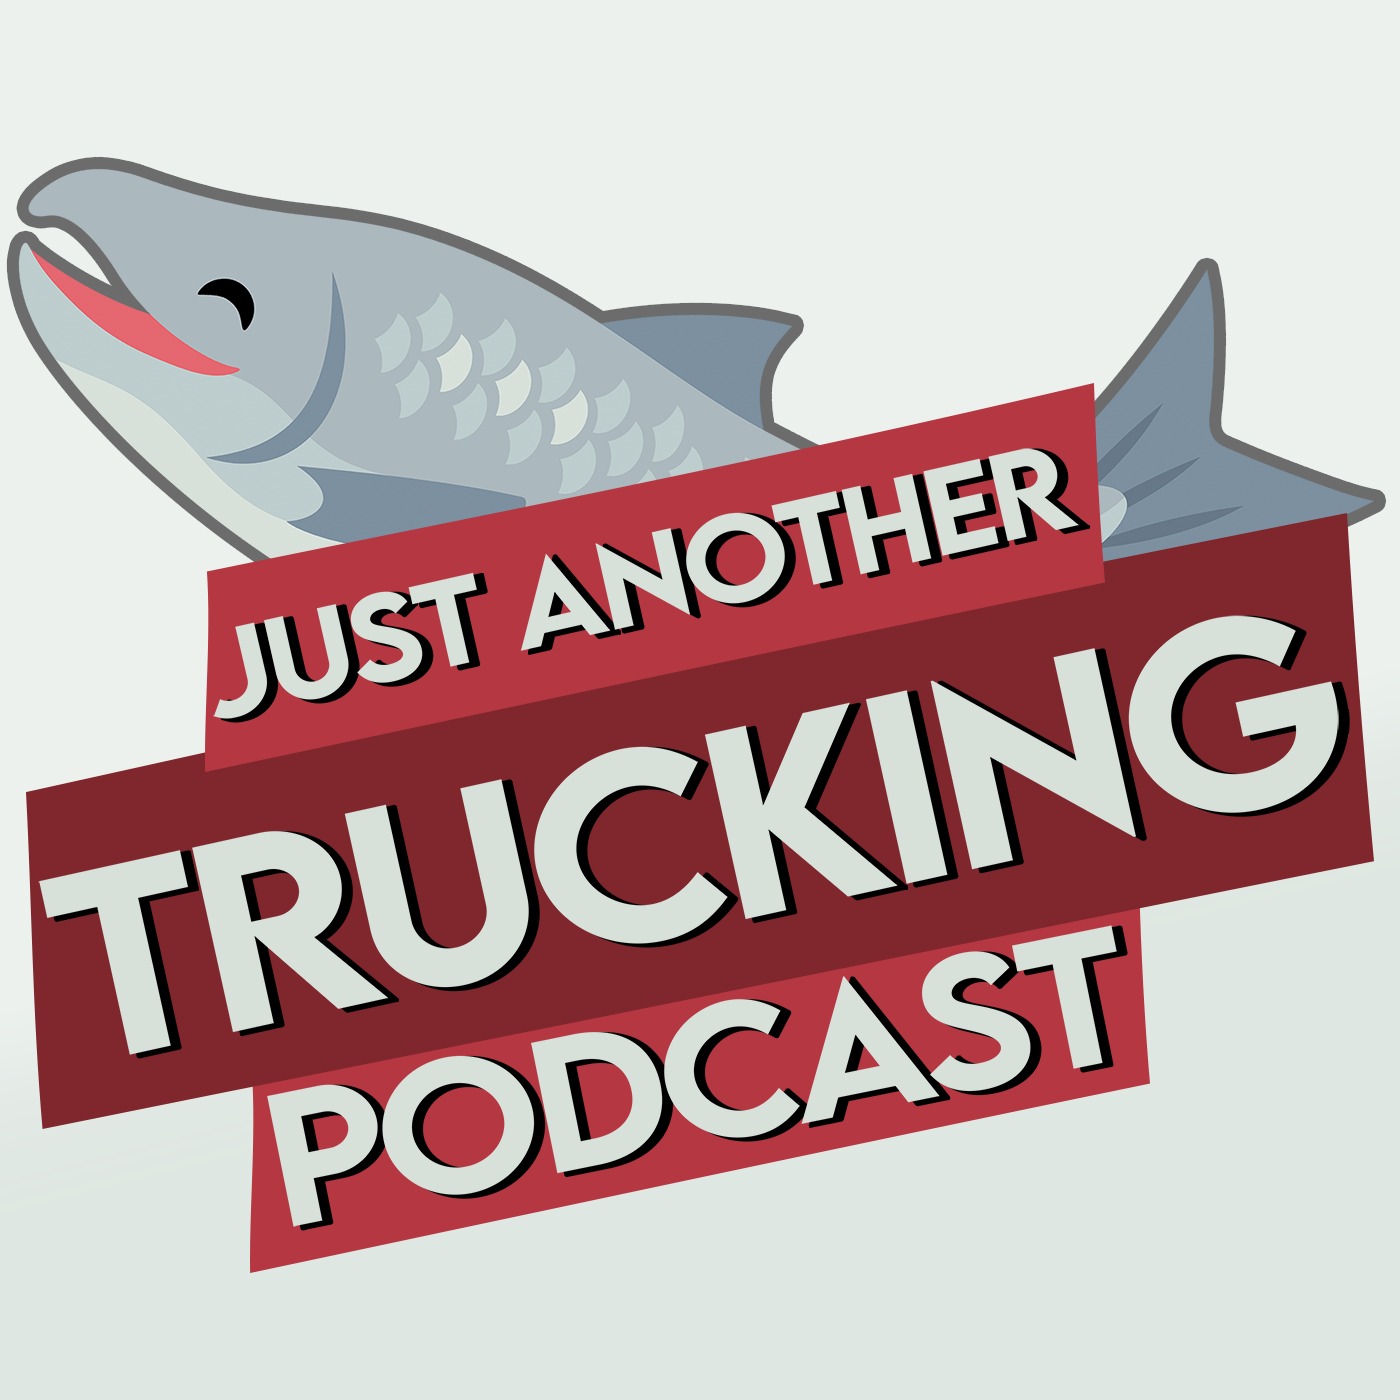 The human slingshot | Just another trucking podcast